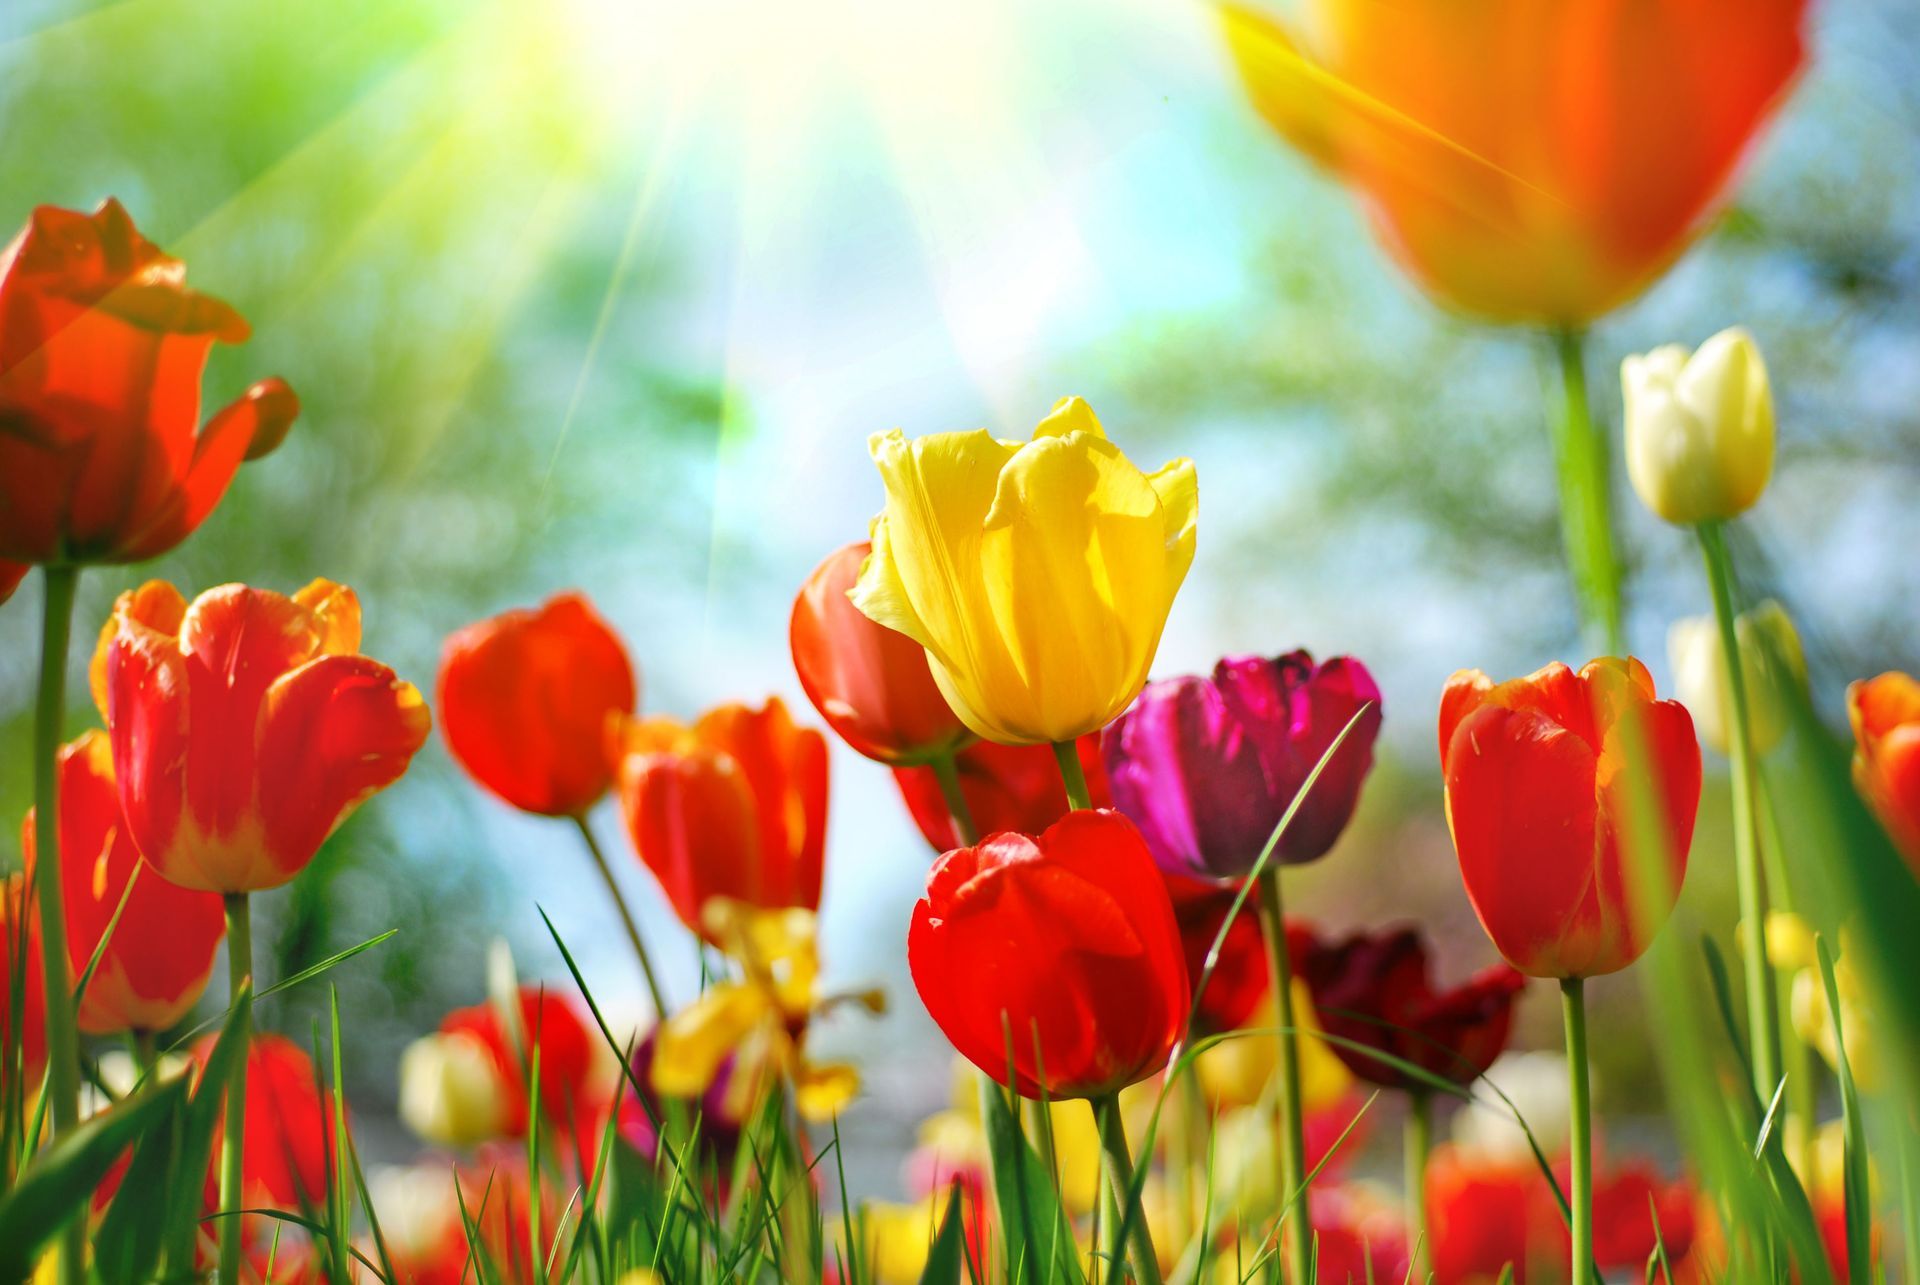 a field of colorful tulips growing in the grass on a sunny day .